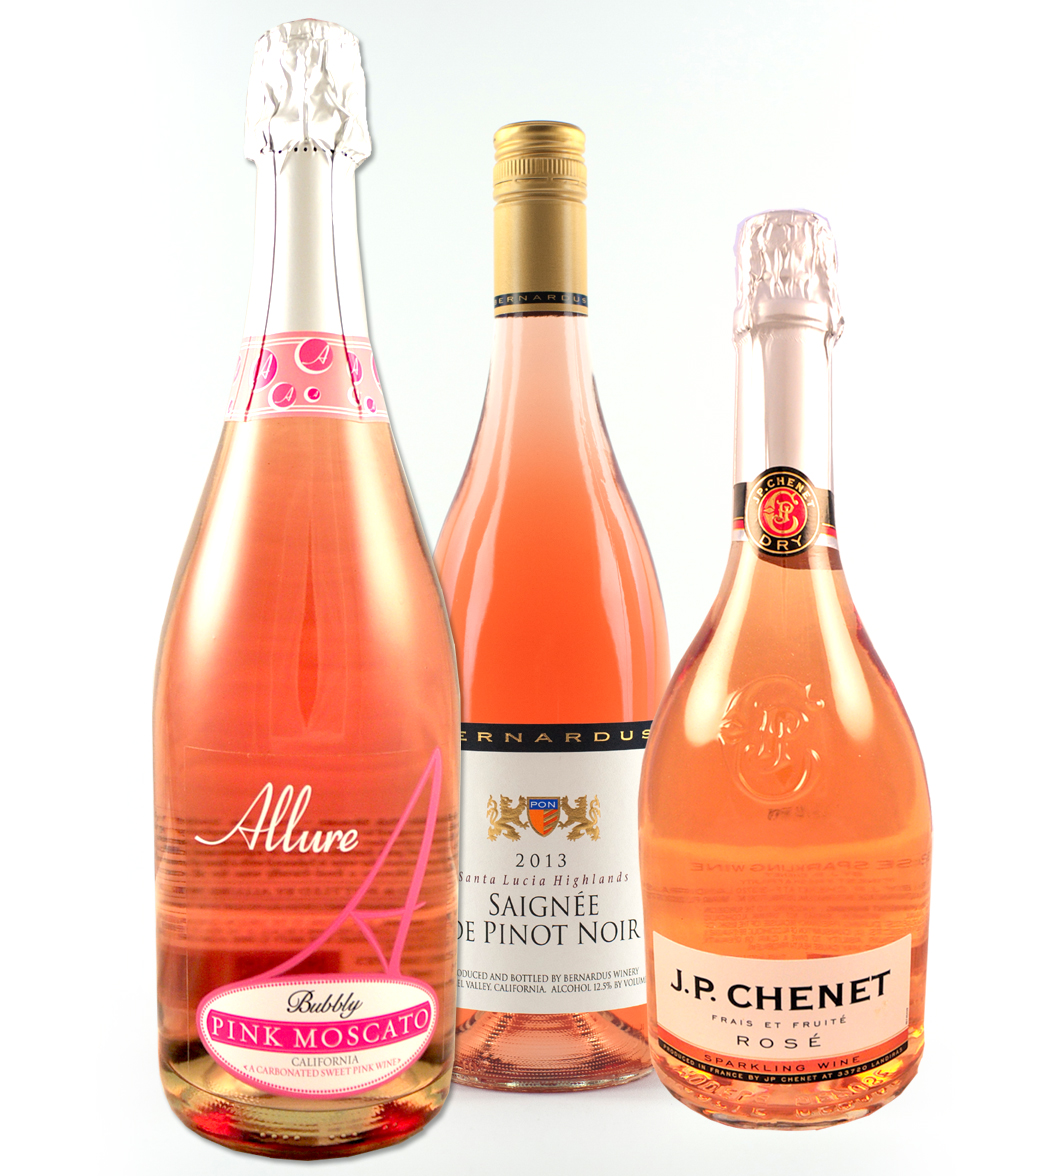 Hotter days call for rosé wines